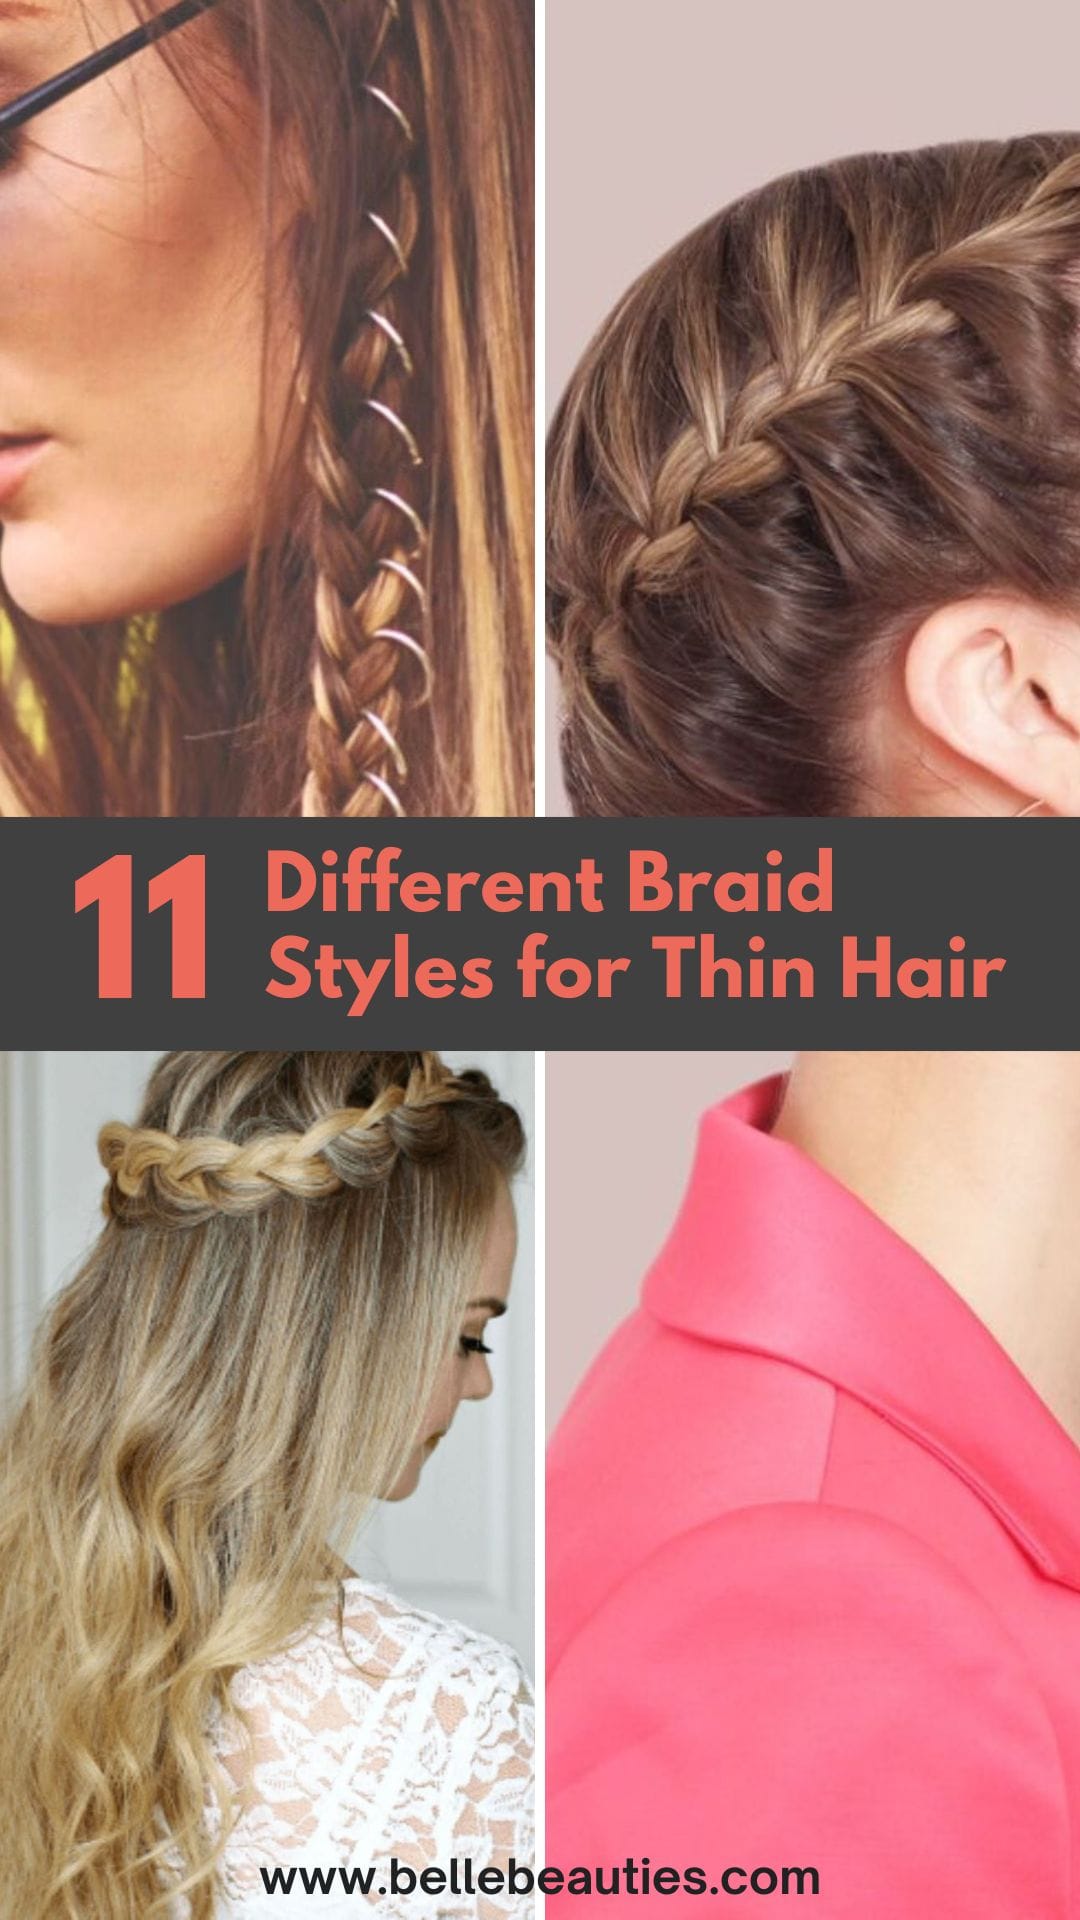 What Kind of Braids Are Good for Thin Hair | Pinterest Pin